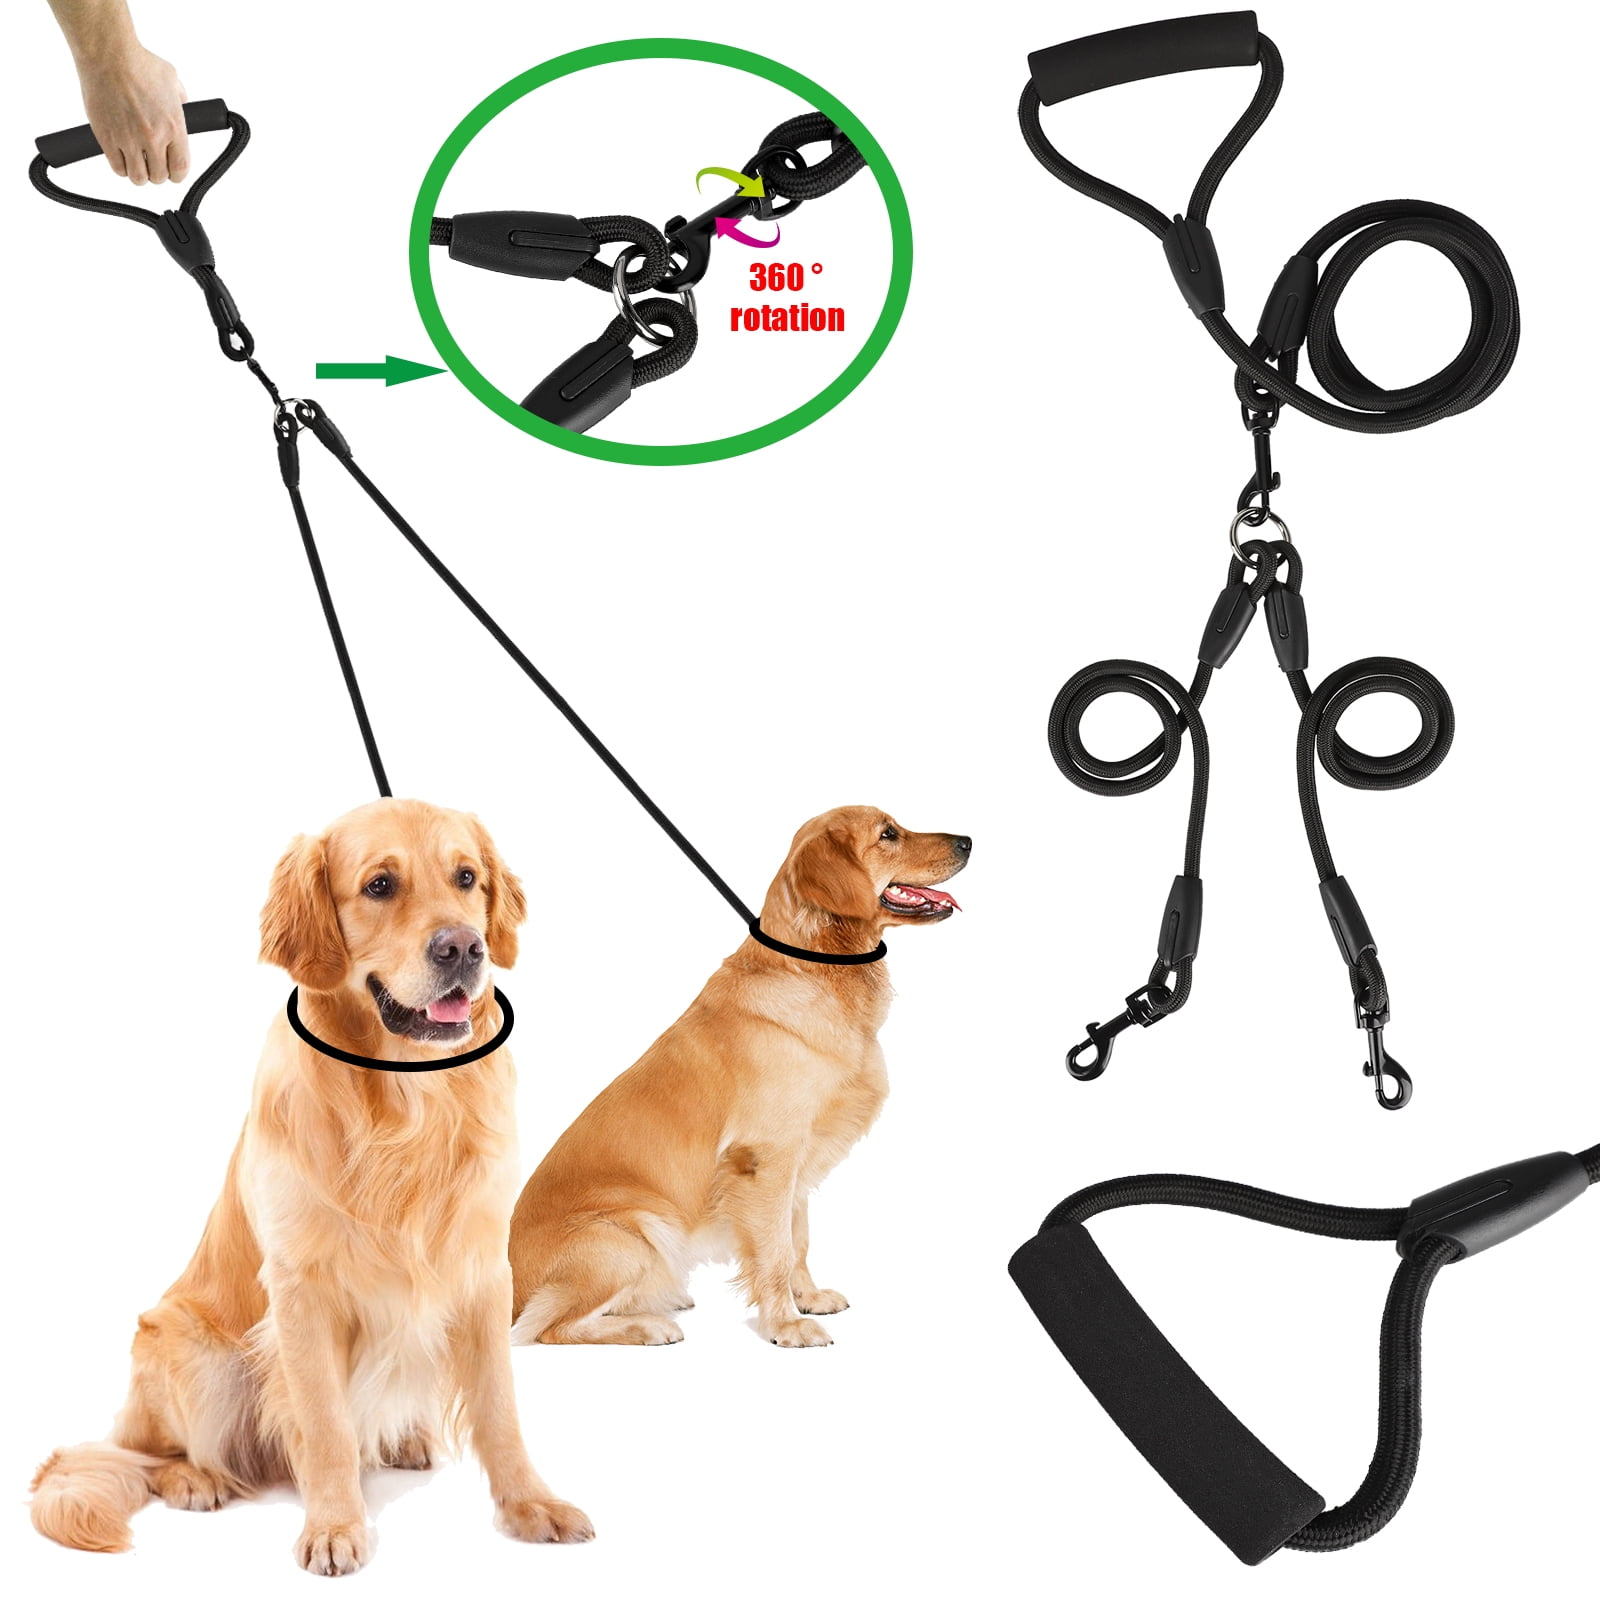 Hopeseily Dual Dog Leash 360° Swivel No Tangle with Shock Absorbing Bungee Reflective Double Dog Walking Training Leash for Small Medium Large Dogs 